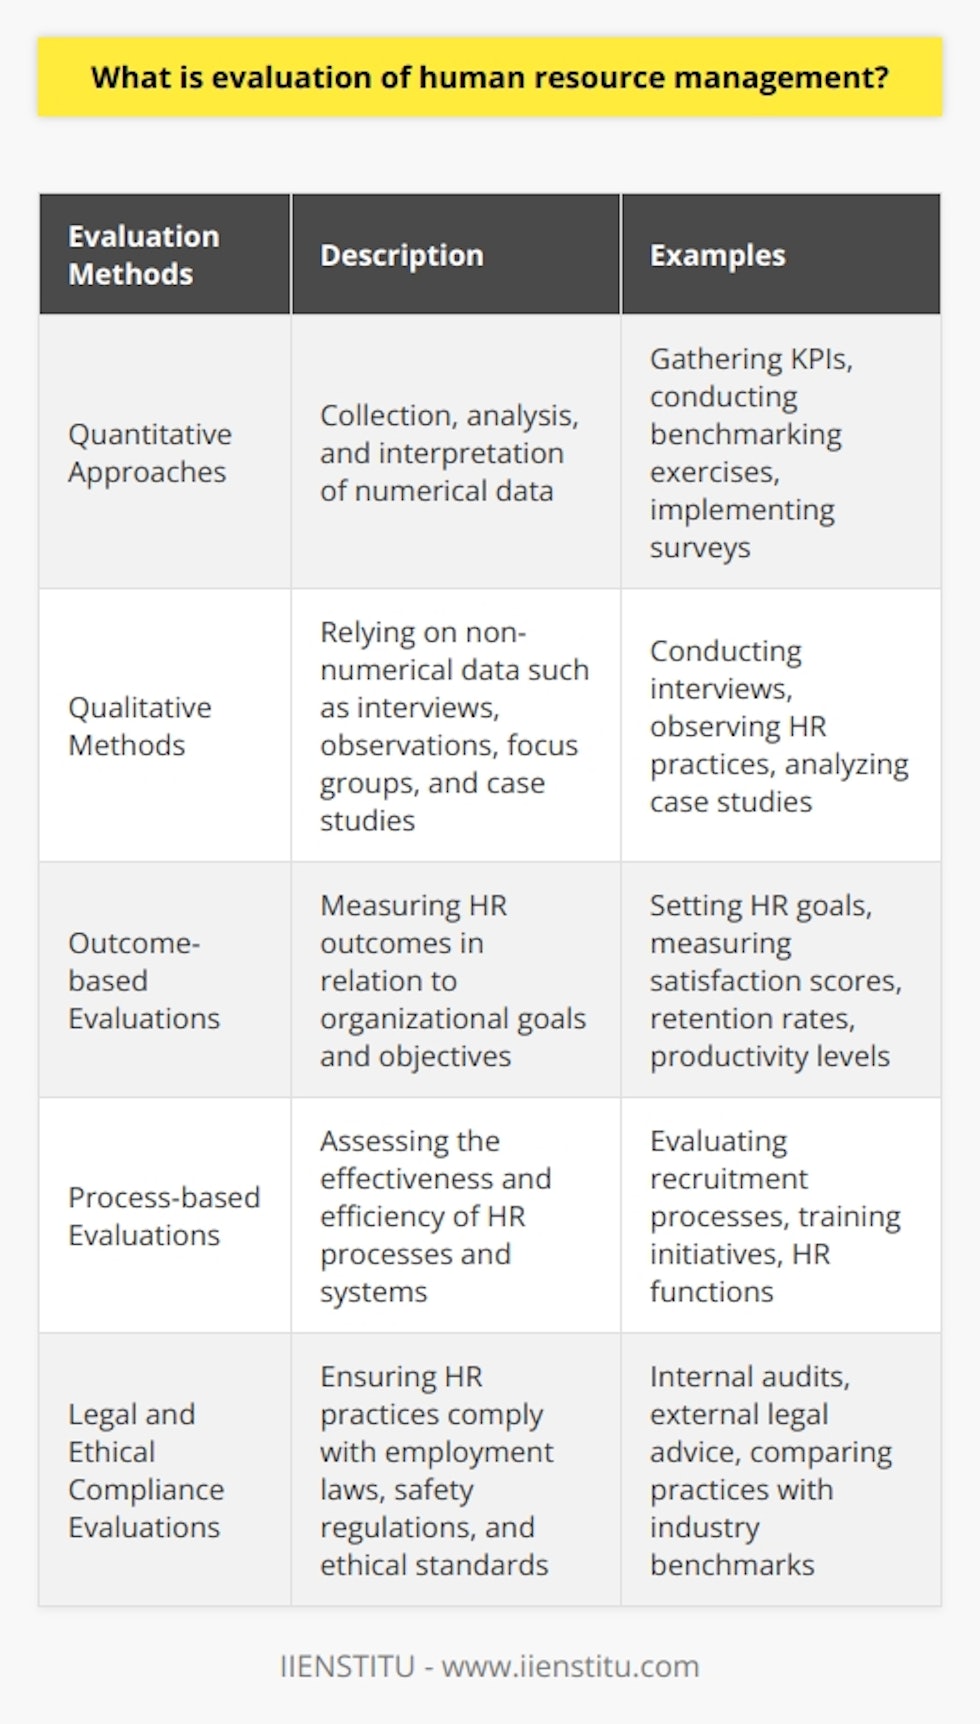 The evaluation of human resource management is a crucial process for organizations to assess the effectiveness and efficiency of their HR policies, practices, and systems. By systematically measuring and analyzing HR functions, organizations can determine the contribution of human resources to overall performance and gauge whether HR strategies are aligned with organizational goals, objectives, and regulations.The evaluation process utilizes various methods and techniques to gather and analyze data. Quantitative approaches involve the collection, analysis, and interpretation of numerical data. This can be achieved through gathering key performance indicators (KPIs), conducting benchmarking exercises, and implementing surveys to track and measure HR performance.On the other hand, qualitative methods rely on non-numerical data, such as interviews, observations, focus groups, and case studies. These techniques offer insights into HR practices and their impact on organizational performance. By combining both quantitative and qualitative data, organizations can gain a comprehensive understanding of their HR management effectiveness.Outcome-based evaluations focus on measuring the outcomes of HR management in relation to organizational goals and objectives. This involves setting specific HR goals, measuring key performance indicators, and analyzing HR program success. For instance, an HR department may seek to improve employee engagement and measure their success through factors like satisfaction scores, retention rates, and productivity levels.Process-based evaluations, on the other hand, assess the effectiveness and efficiency of HR processes and systems. This evaluation examines recruitment processes, training and development initiatives, and other HR functions to ensure they are effectively fulfilling the organization's needs. Quantitative and qualitative data are employed to evaluate processes and identify areas for improvement.Legal and ethical compliance is an essential aspect of evaluating human resource management. Organizations must ensure that their HR practices comply with employment laws, safety regulations, and anti-discrimination policies while also adhering to ethical standards. Evaluations in this area may involve internal audits, seeking external legal advice, or comparing HR practices with industry benchmarks.In conclusion, evaluating human resource management is crucial for organizations to assess the effectiveness and efficiency of their HR policies, practices, and systems. By utilizing quantitative and qualitative methods and techniques, organizations can focus on outcome-based or process-based evaluations. Additionally, legal and ethical compliance evaluations ensure HR practices align with laws and ethical standards. The evaluation process contributes to continuous improvement in HR management, enabling the development of policies, practices, and systems that enhance organizational performance and competitiveness.